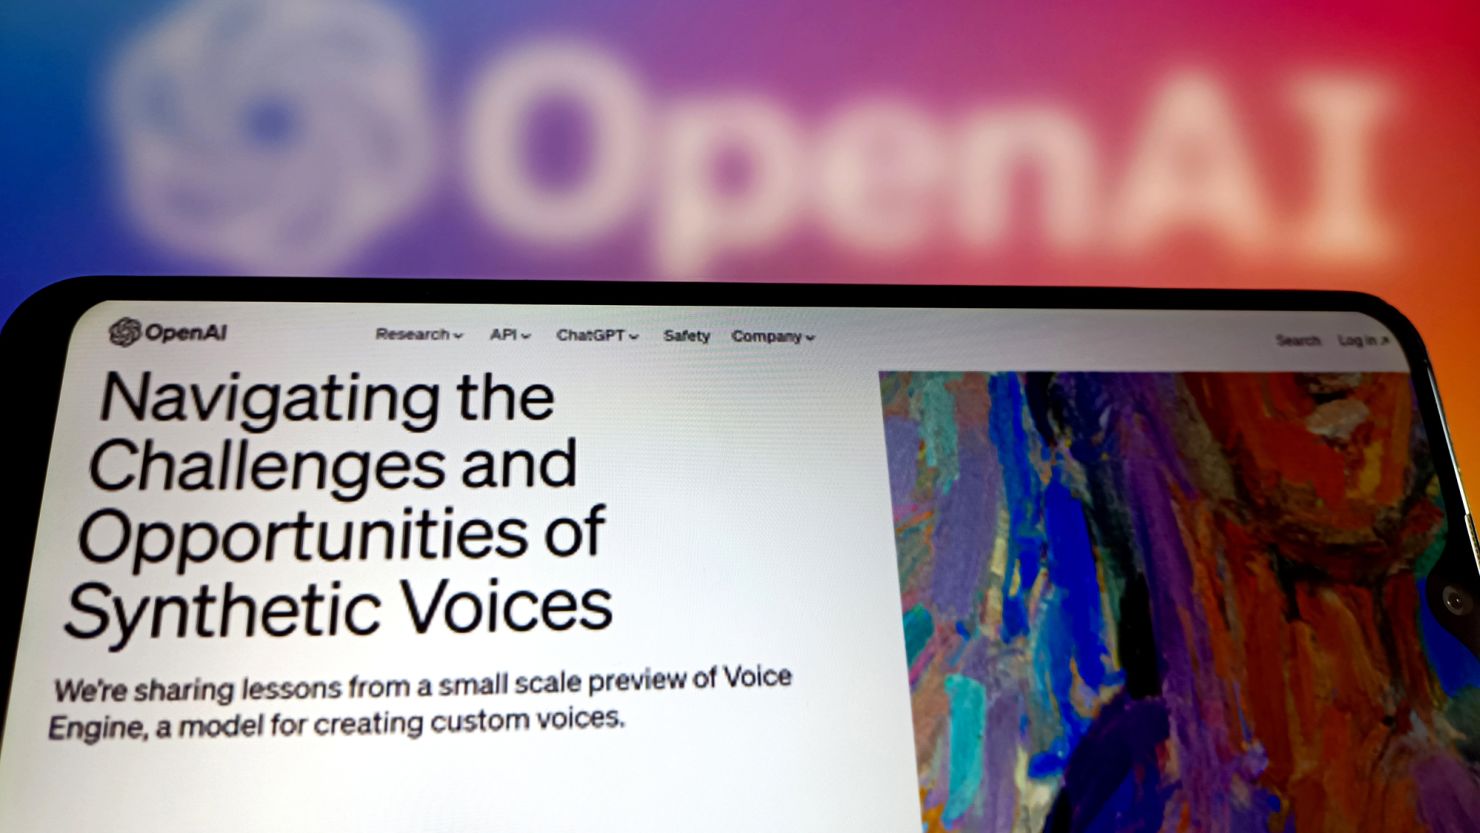 OpenAI is releasing Voice Engine, which uses a sample audio clip of someone speaking to create an AI-generated version of their voice.